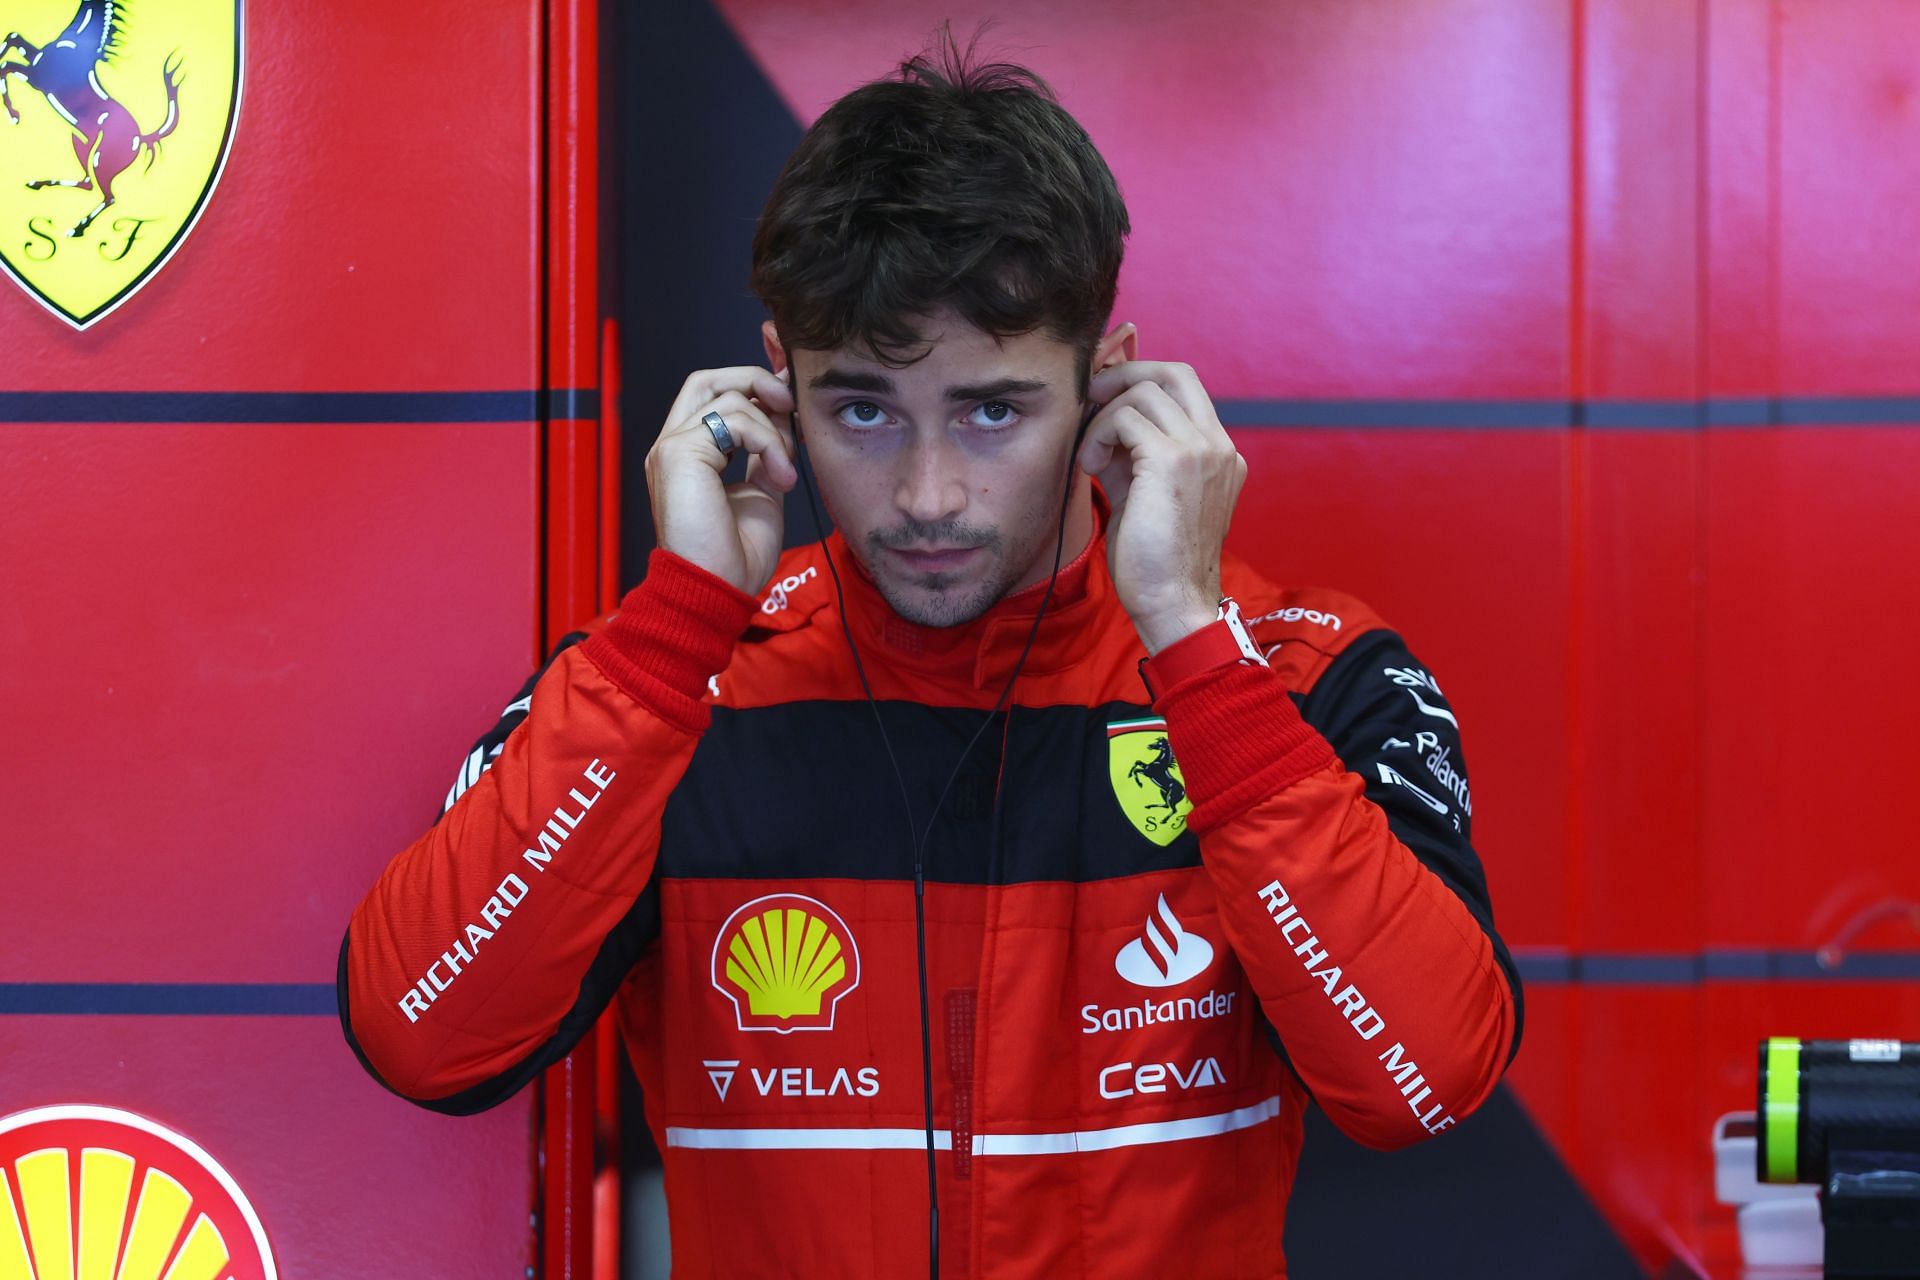 Charles Leclerc blazed to pole position for the 2022 F1 Spanish GP (Photo by Lars Baron/Getty Images)